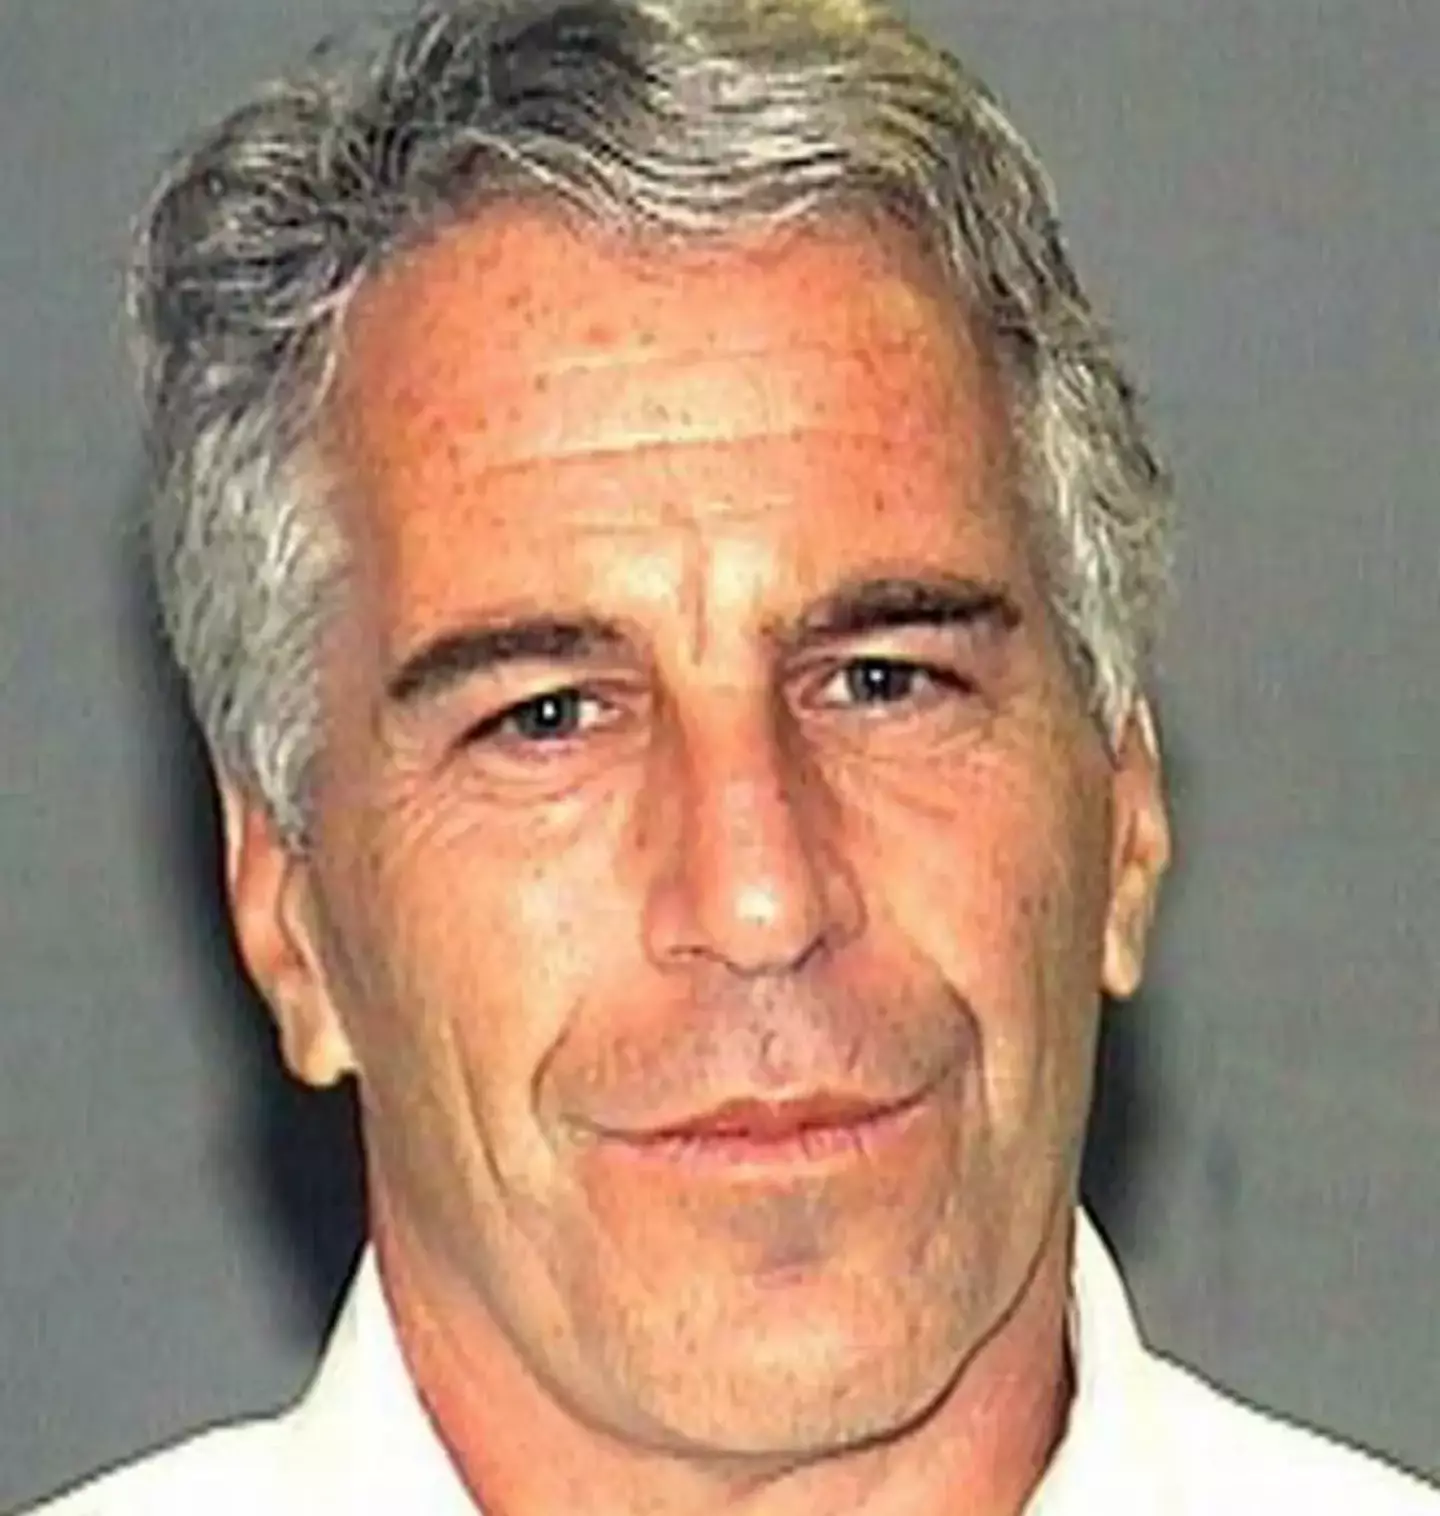 Jeffrey Epstein died in his cell in 2019.